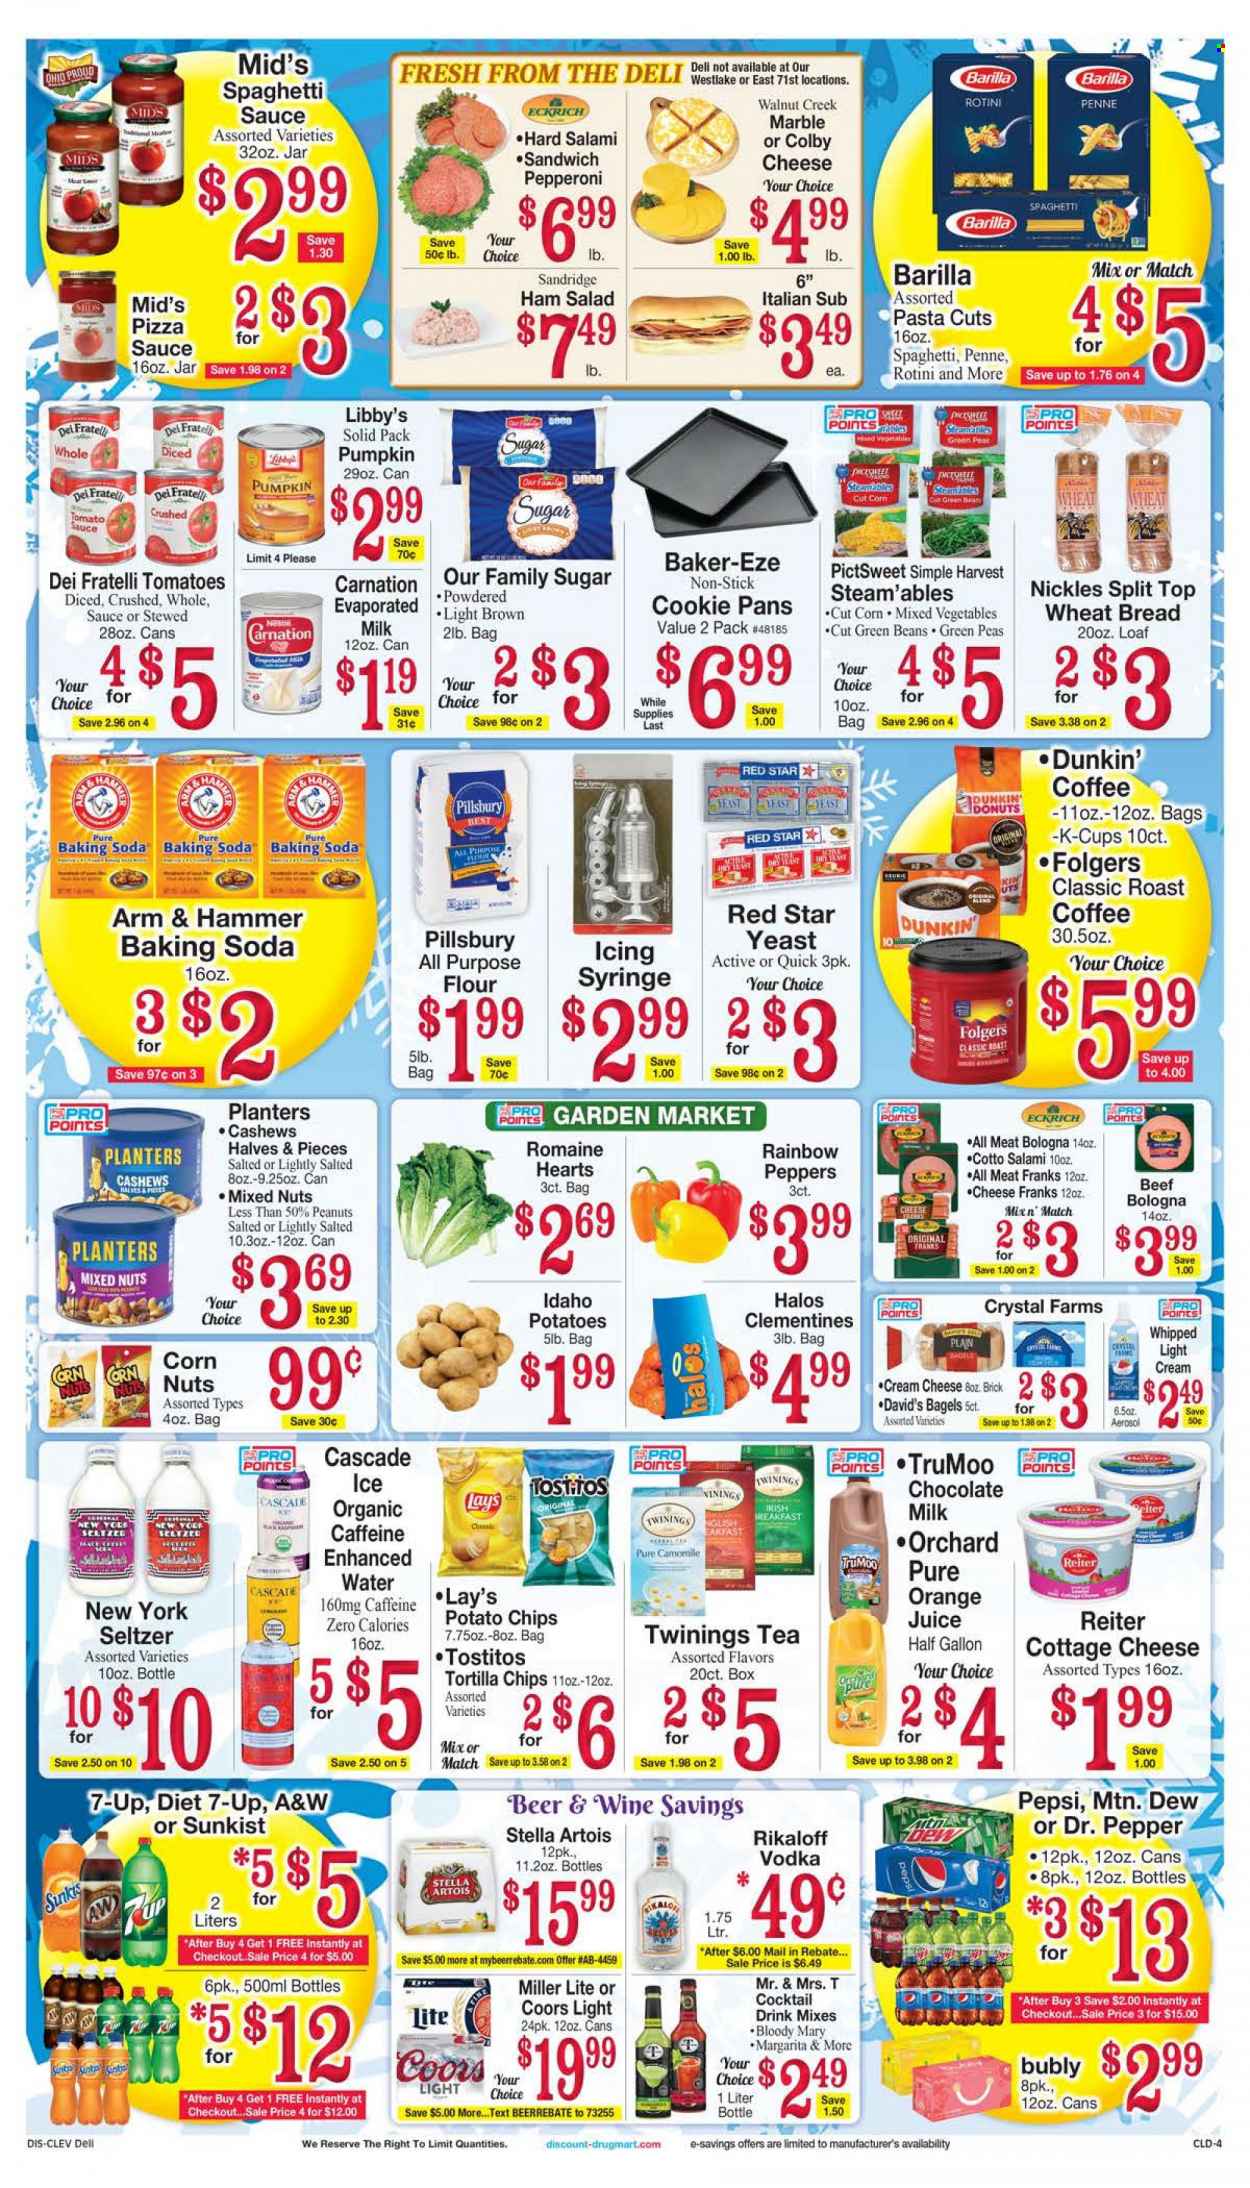 thumbnail - Discount Drug Mart Flyer - 12/01/2021 - 12/07/2021 - Sales products - bagels, wheat bread, donut, corn, green beans, pumpkin, peas, salad, peppers, spaghetti, sandwich, pasta, Pillsbury, Barilla, spaghetti sauce, salami, ham, Colby cheese, cottage cheese, milk, yeast, mixed vegetables, milk chocolate, chocolate, tortilla chips, potato chips, chips, Lay’s, Tostitos, all purpose flour, ARM & HAMMER, bicarbonate of soda, sugar, tomato sauce, penne, cashews, peanuts, mixed nuts, Planters, Mountain Dew, Pepsi, orange juice, juice, Dr. Pepper, 7UP, A&W, seltzer water, tea, Twinings, coffee, Folgers, coffee capsules, K-Cups, vodka, beer, Cascade, clementines, Miller Lite, Stella Artois, Coors. Page 4.